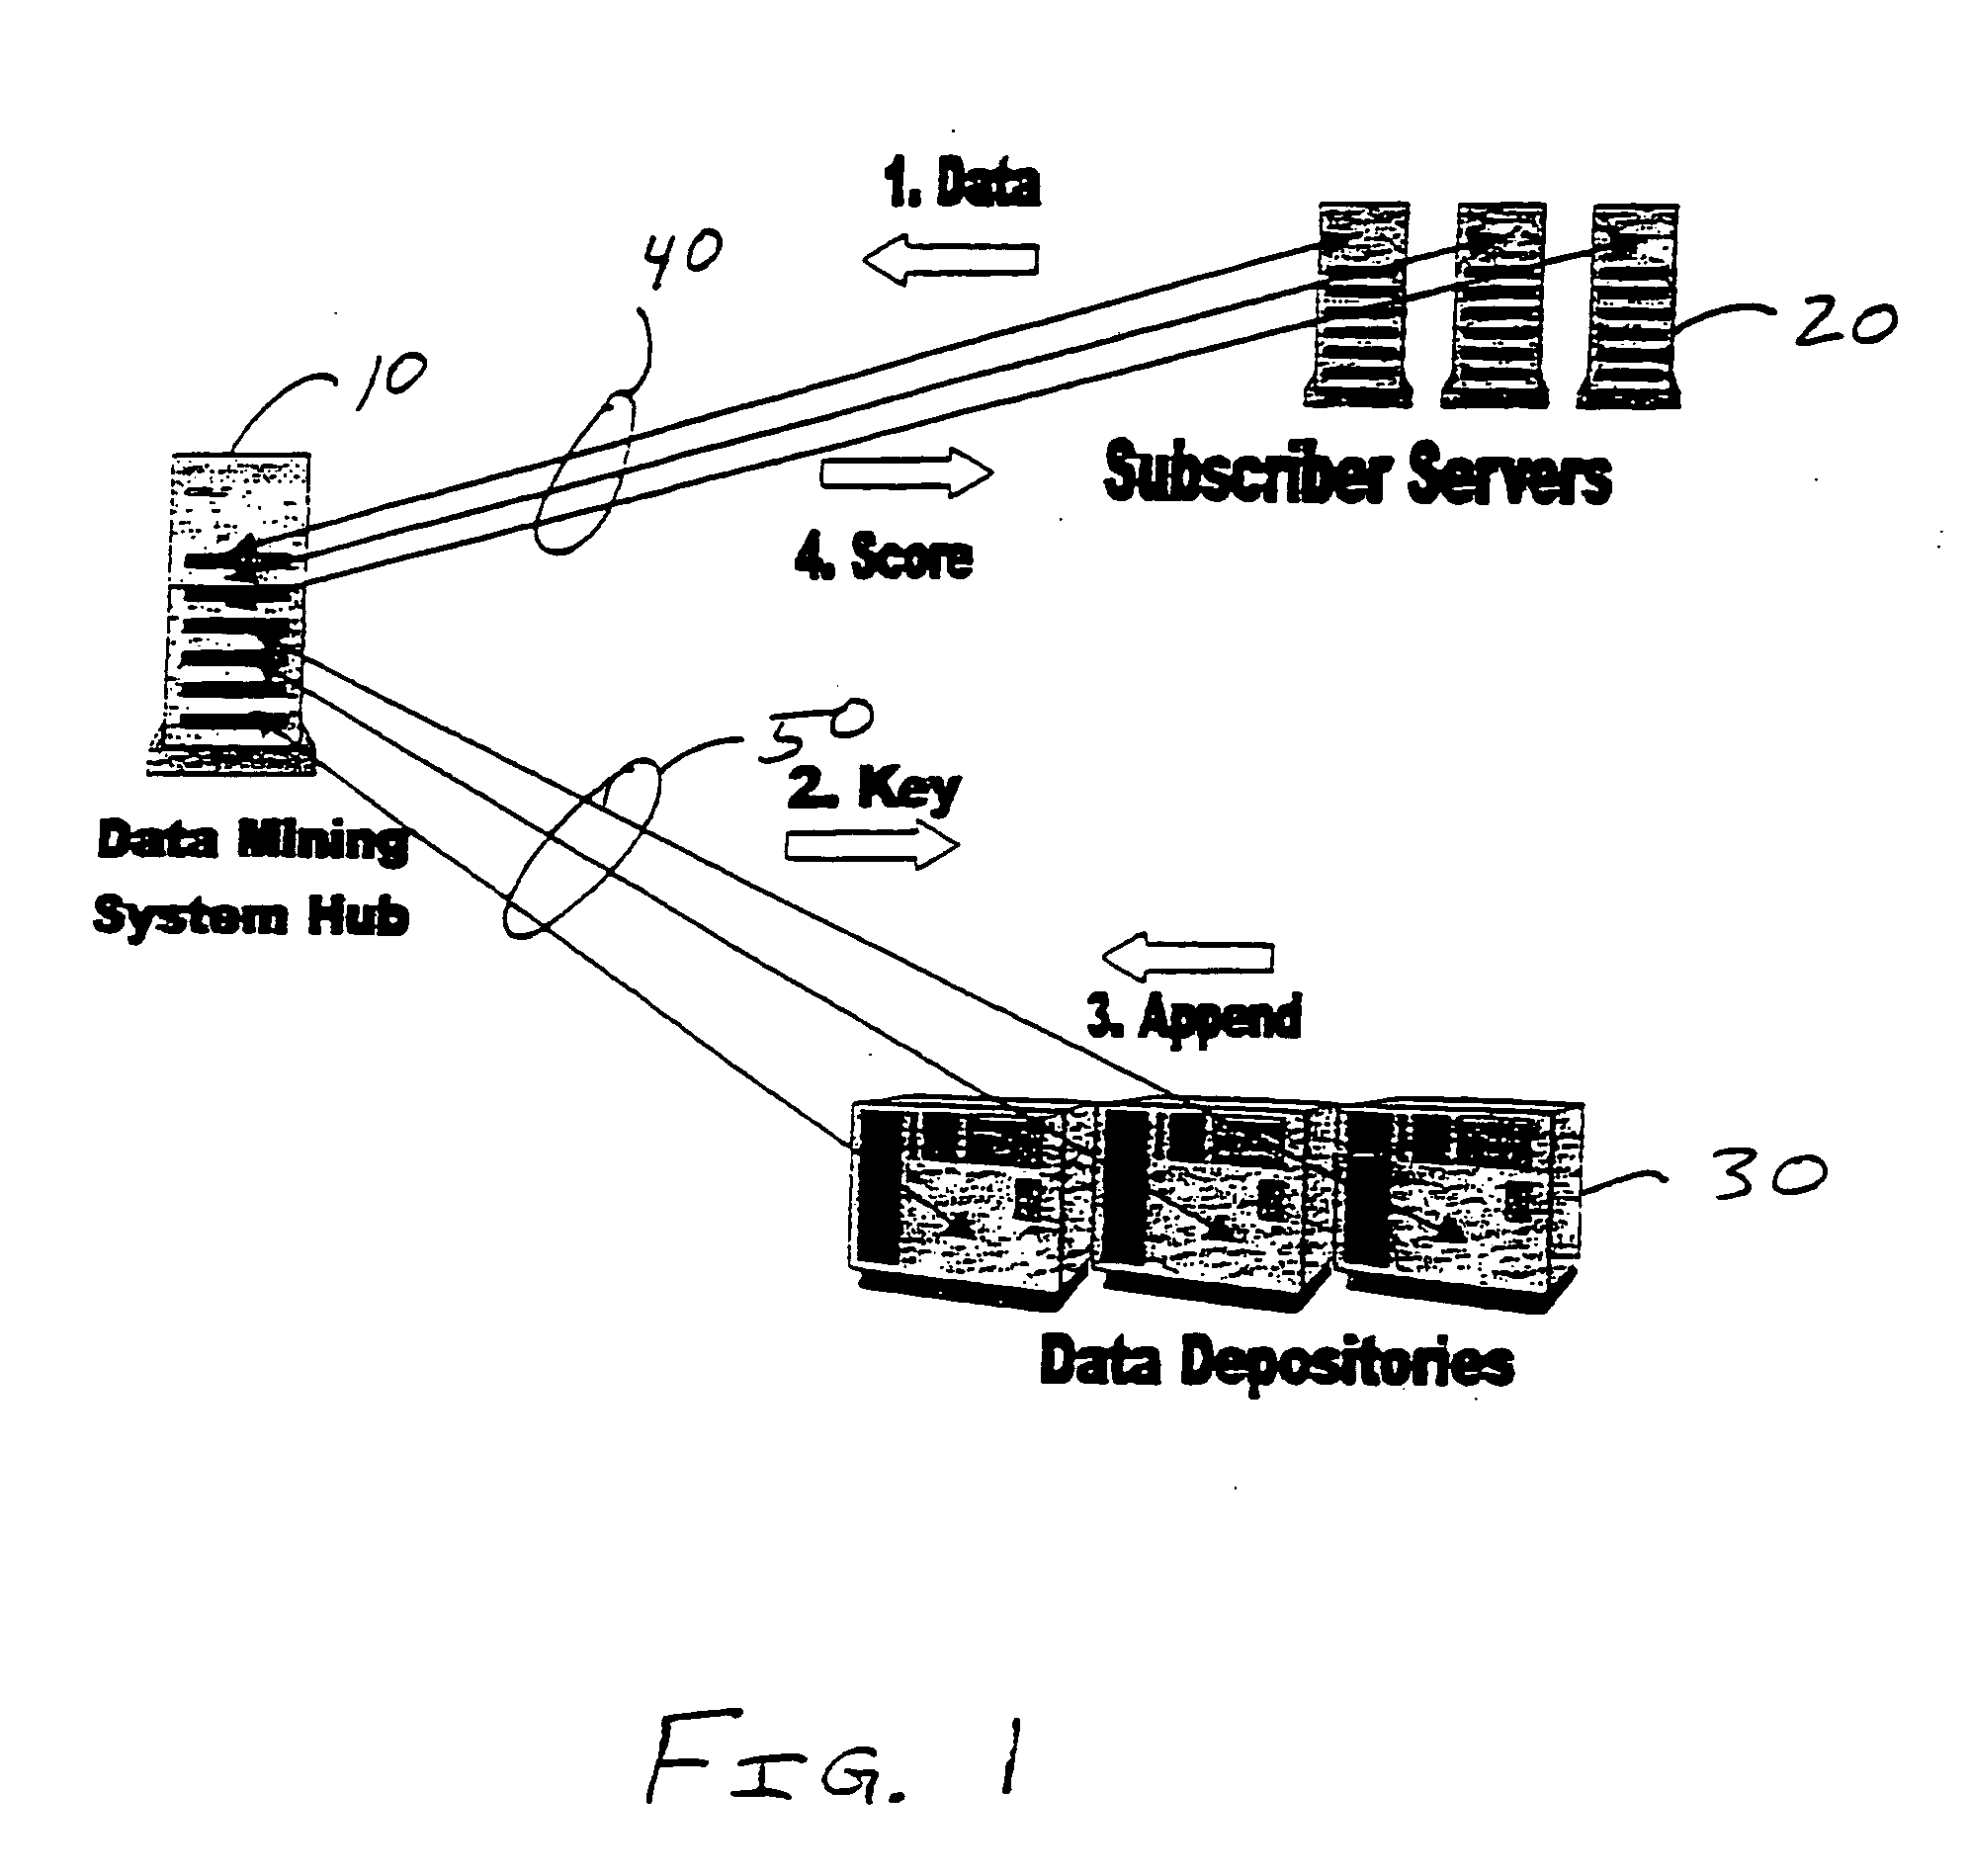 Real-time Internet data mining system and method for aggregating, routing, enhancing, preparing, and analyzing web databases